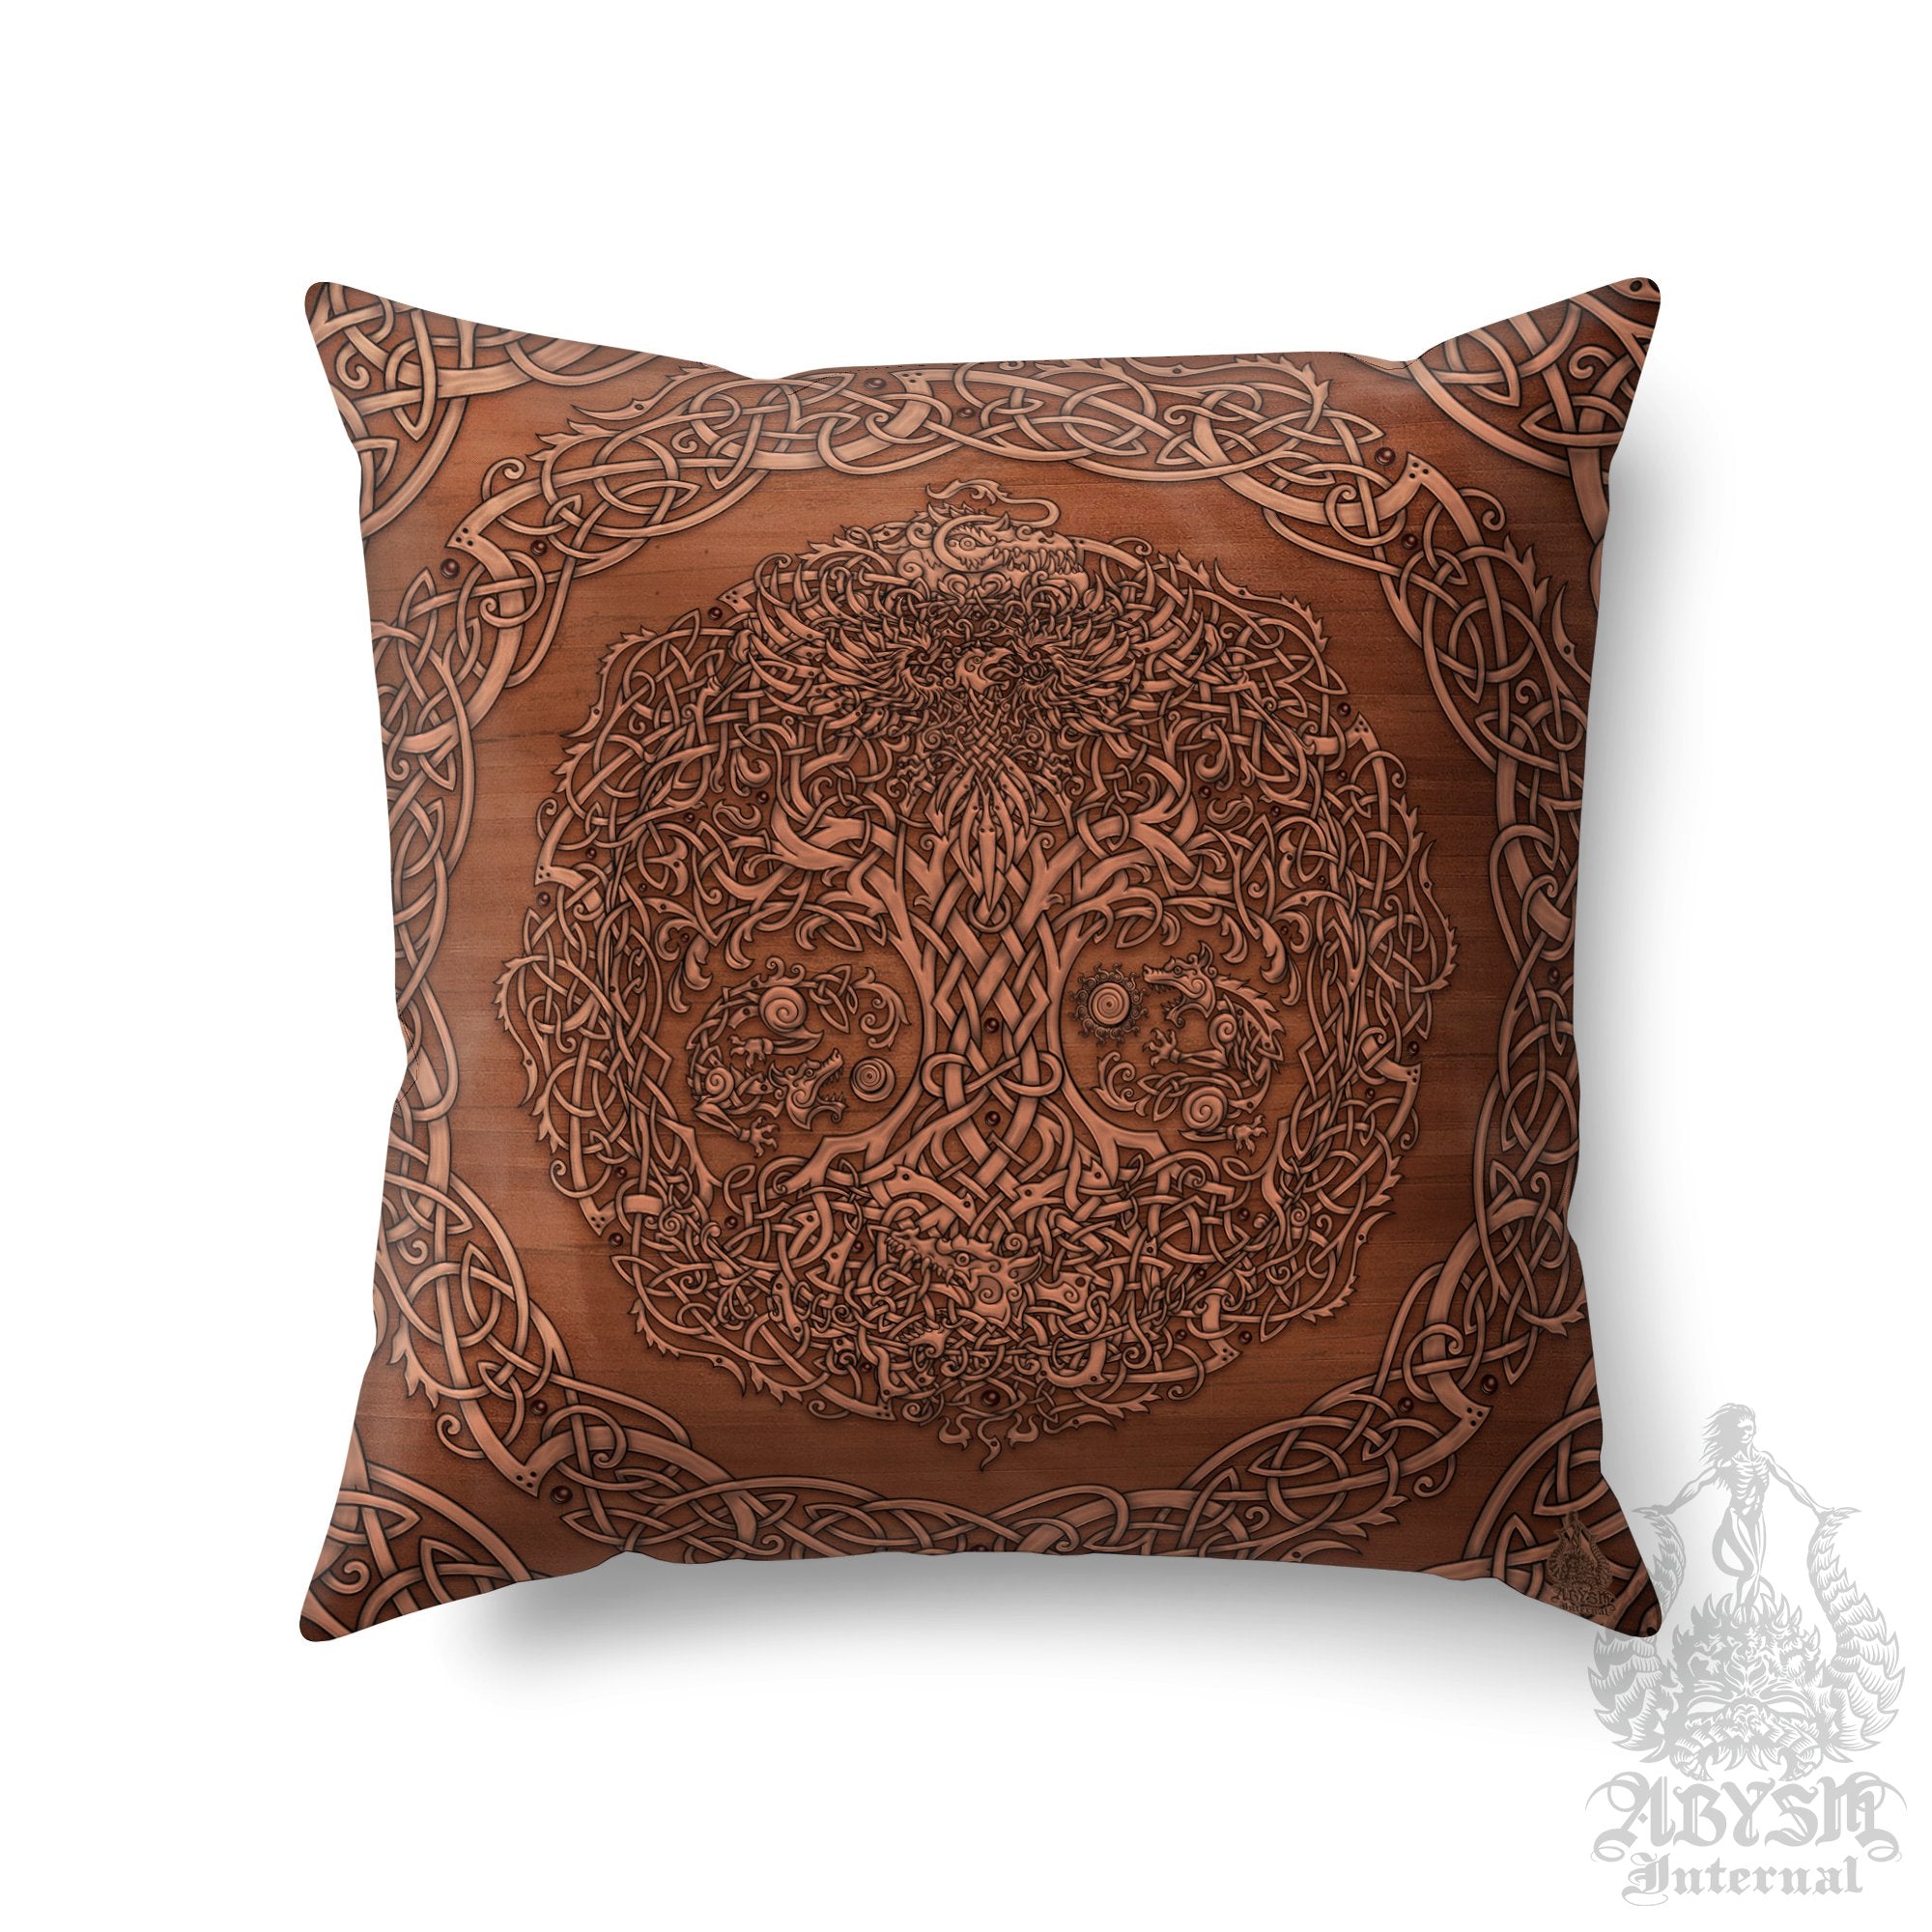 Viking Throw Pillow, Decorative Accent Pillow, Beige Square Cushion Cover, Yggdrasil, Norse Decor, Nordic Art, Alternative Home - Tree of Life, Wood - Abysm Internal